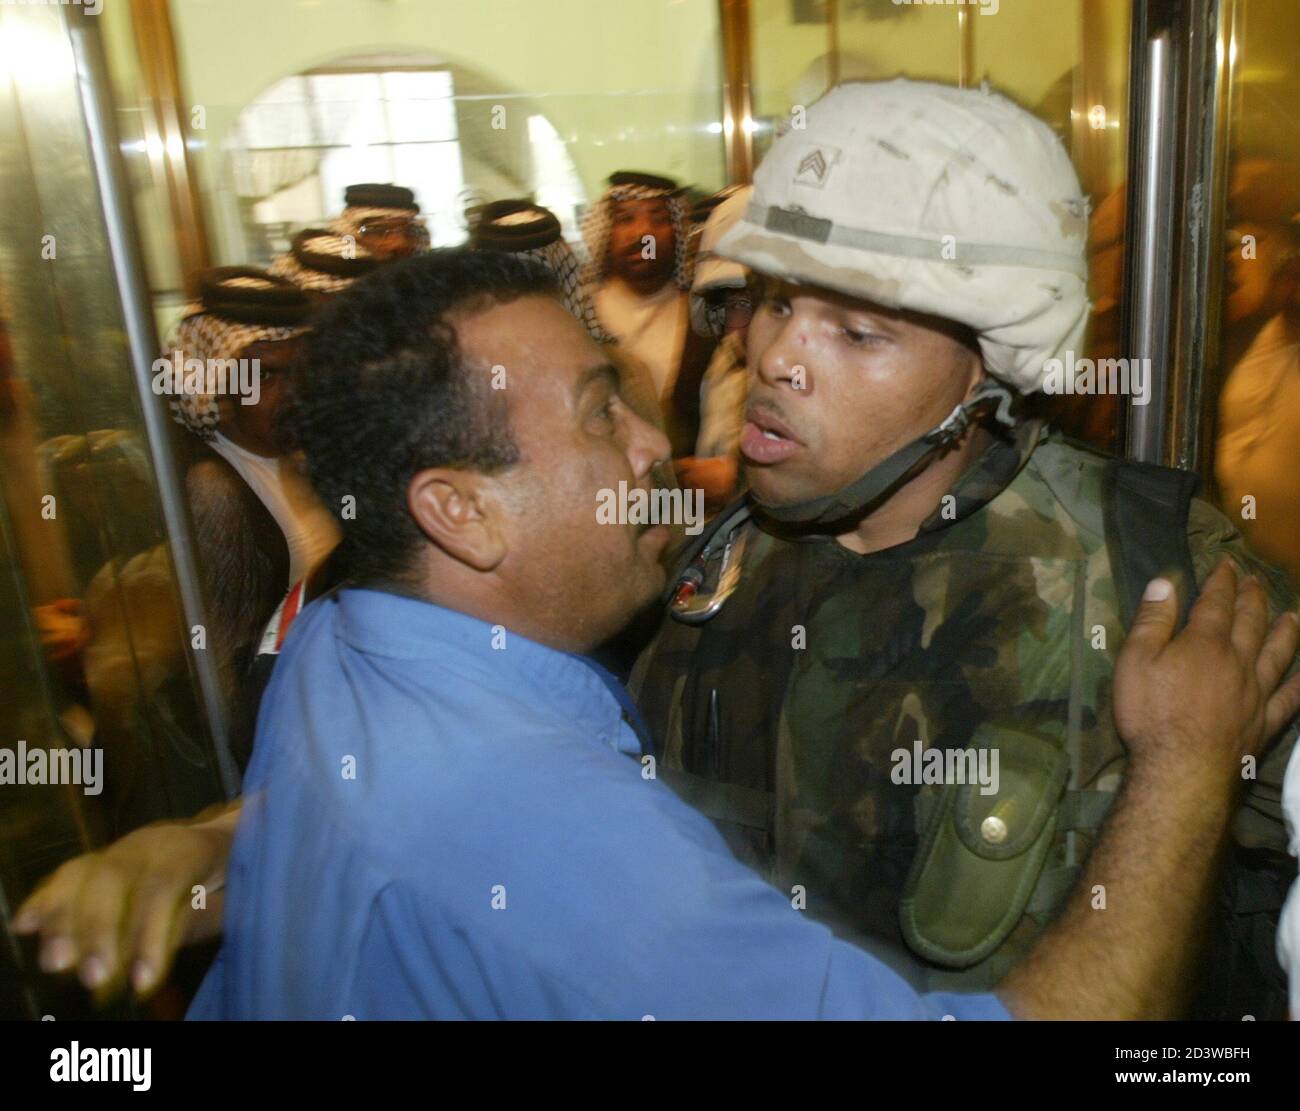 A U.S Army soldier, guarding a Baghdad hotel elevator, is confronted by an  Iraqi man after an aide to radical Shi'ite cleric Moqtada al-Sadr, Hazem  al-Araji, was detained April 13, 2004. Al-Arajj